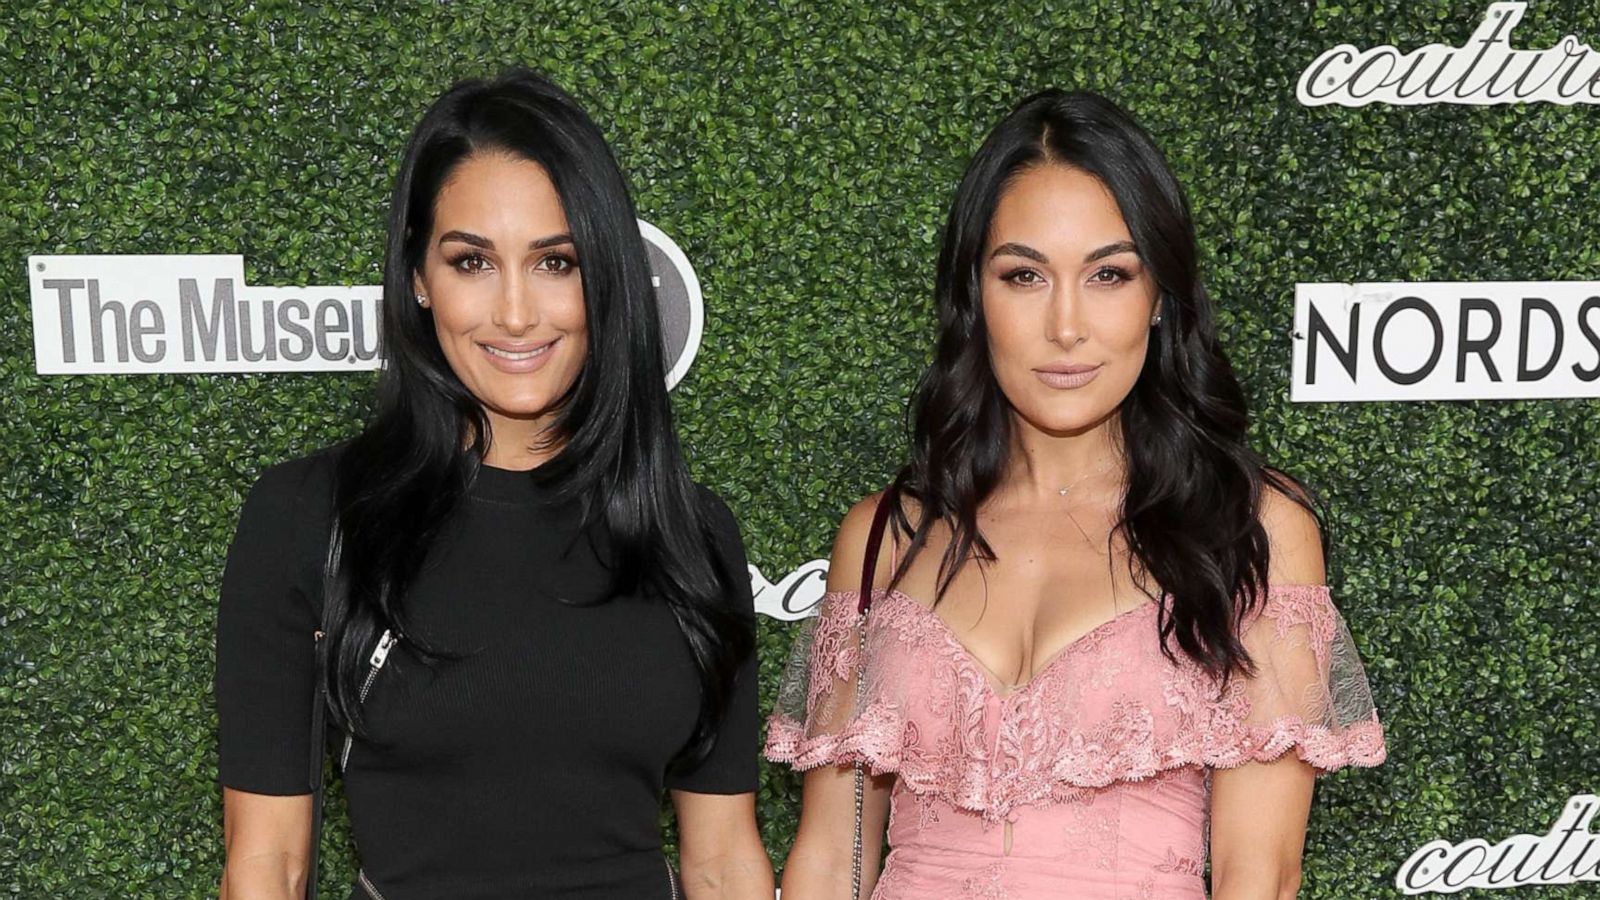 25 Photos Of Nikki And Brie Bella Living Their Best Lives